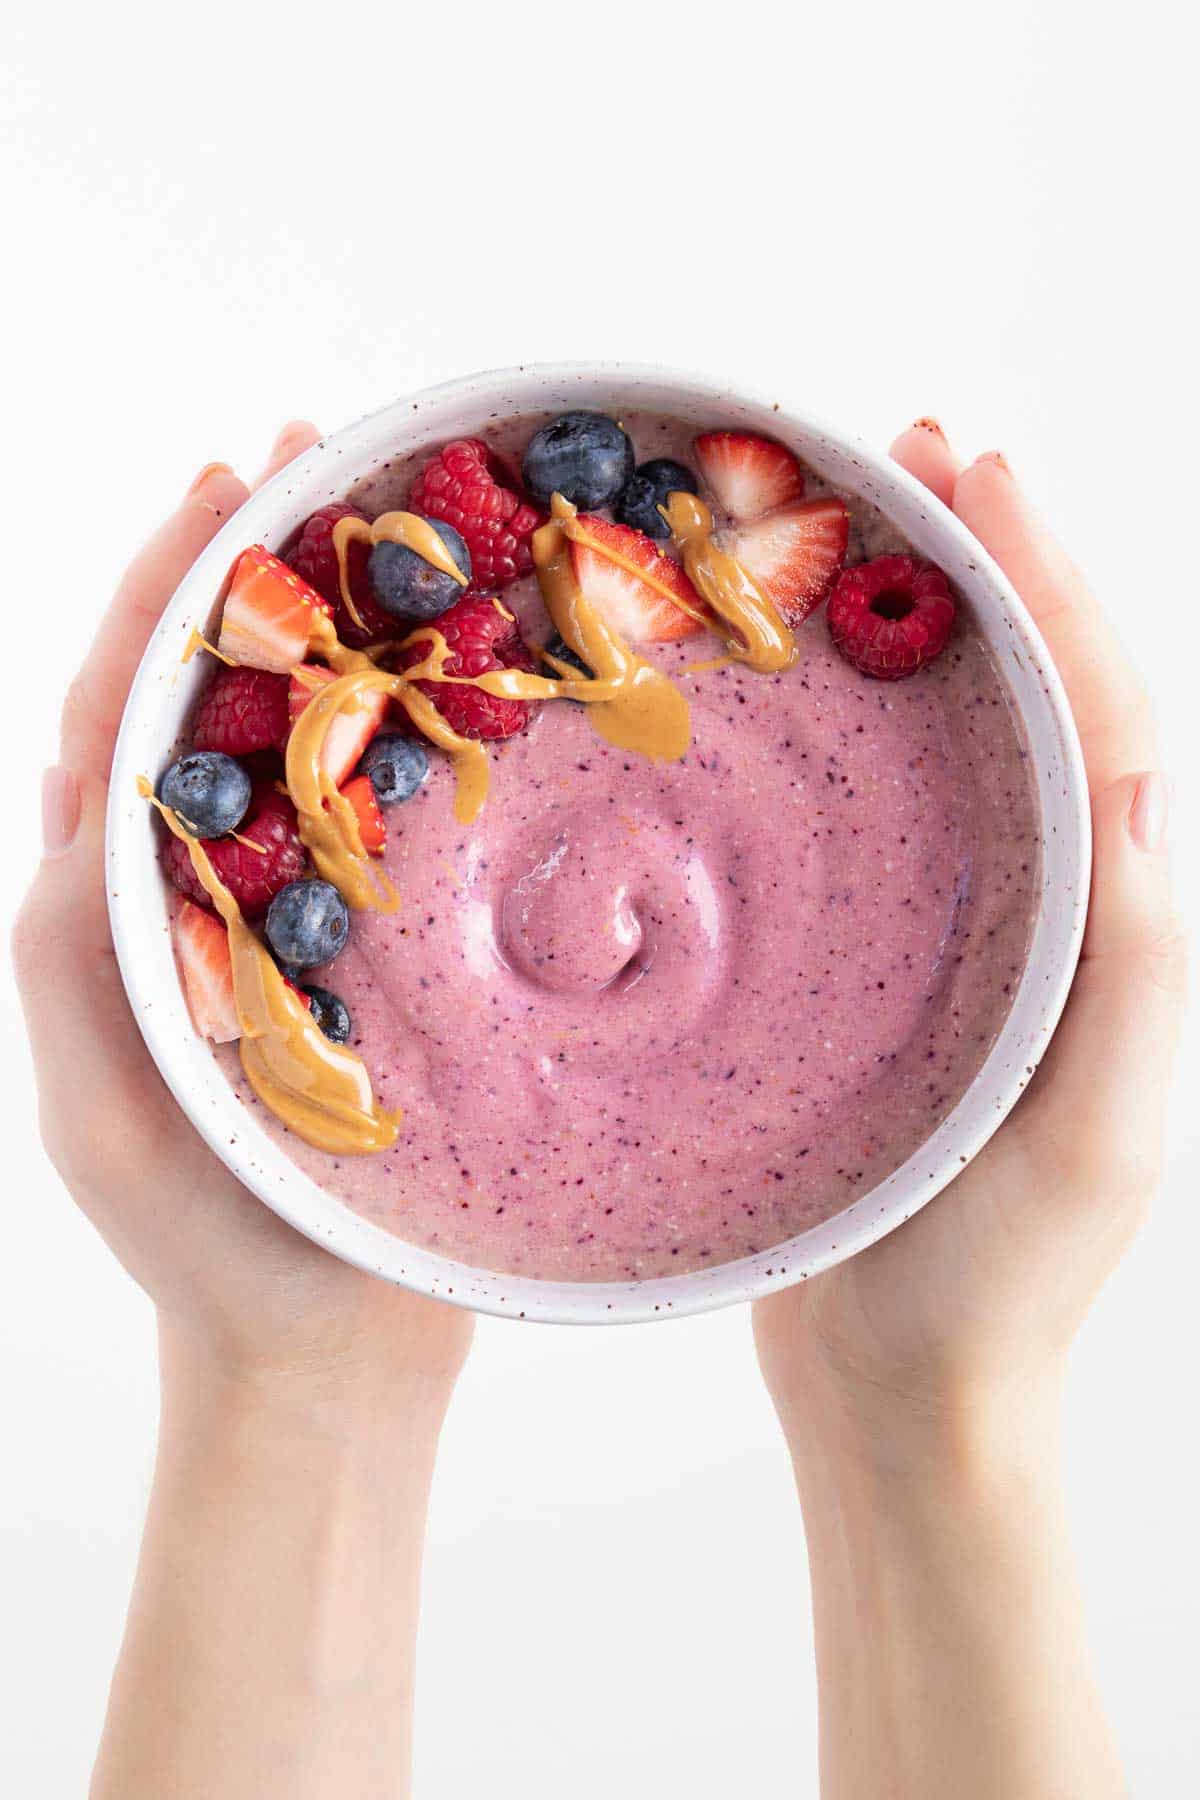 two hands holding a purple smoothie topped with blueberries, raspberries, and strawberries